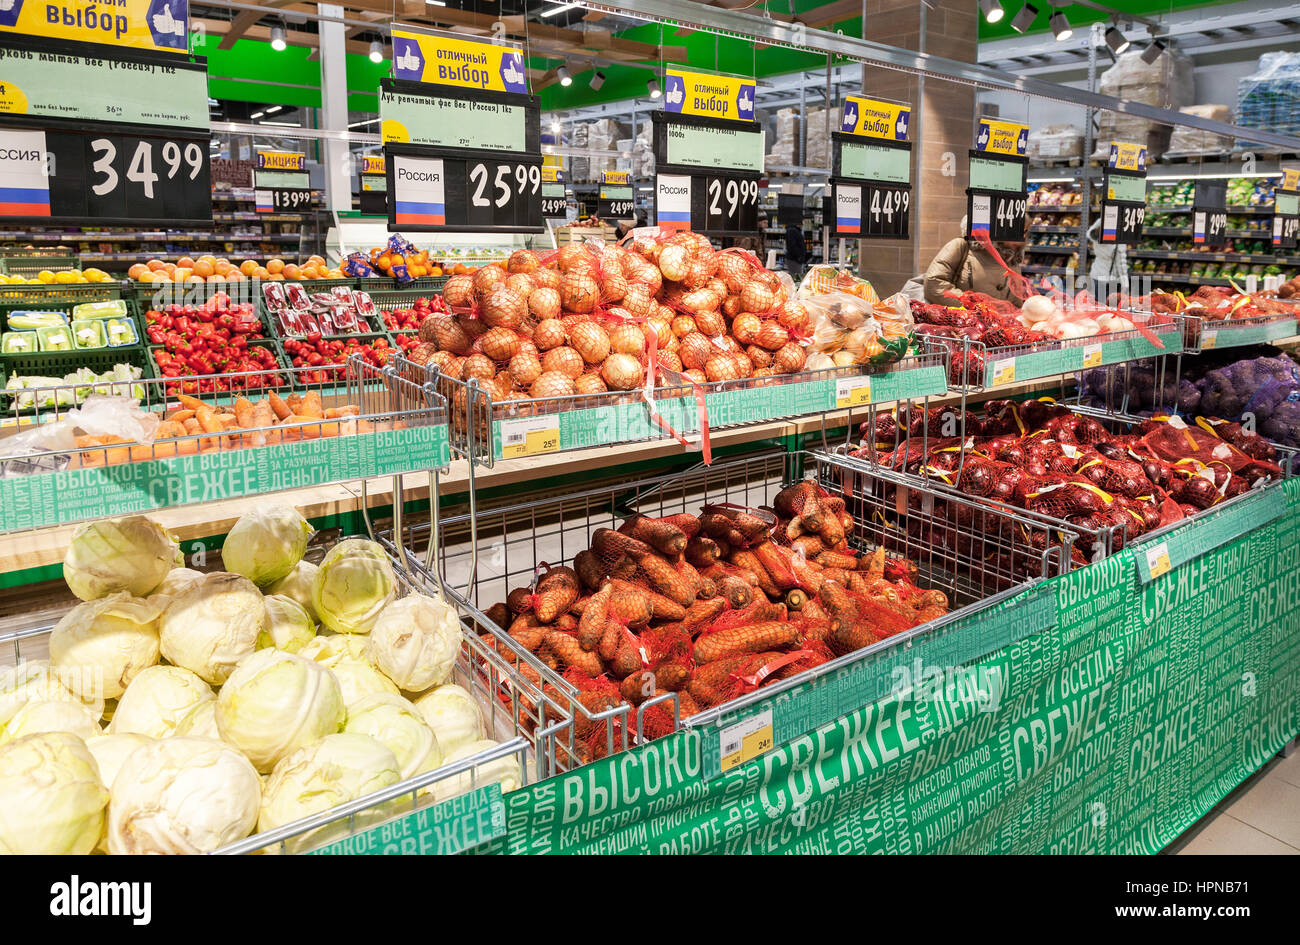 SAMARA, RUSSIA - JANUARY 2, 2017: Fresh vegetables and fruits ready for sale in supermarket Lenta. One of largest retailer in Russia Stock Photo